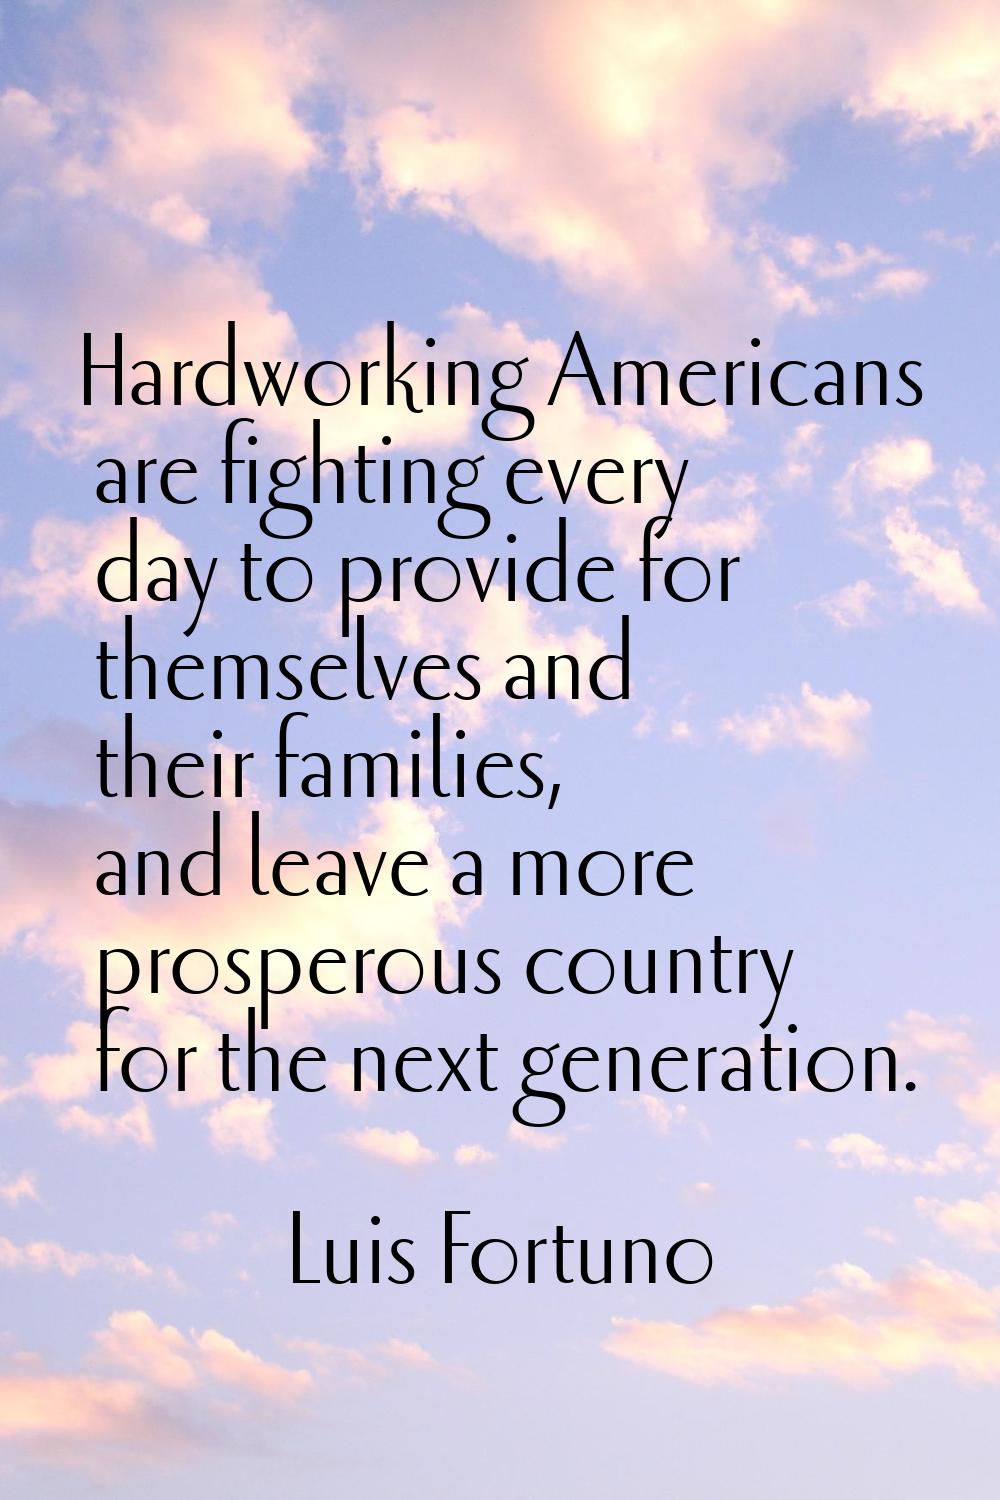 Hardworking Americans are fighting every day to provide for themselves and their families, and leav